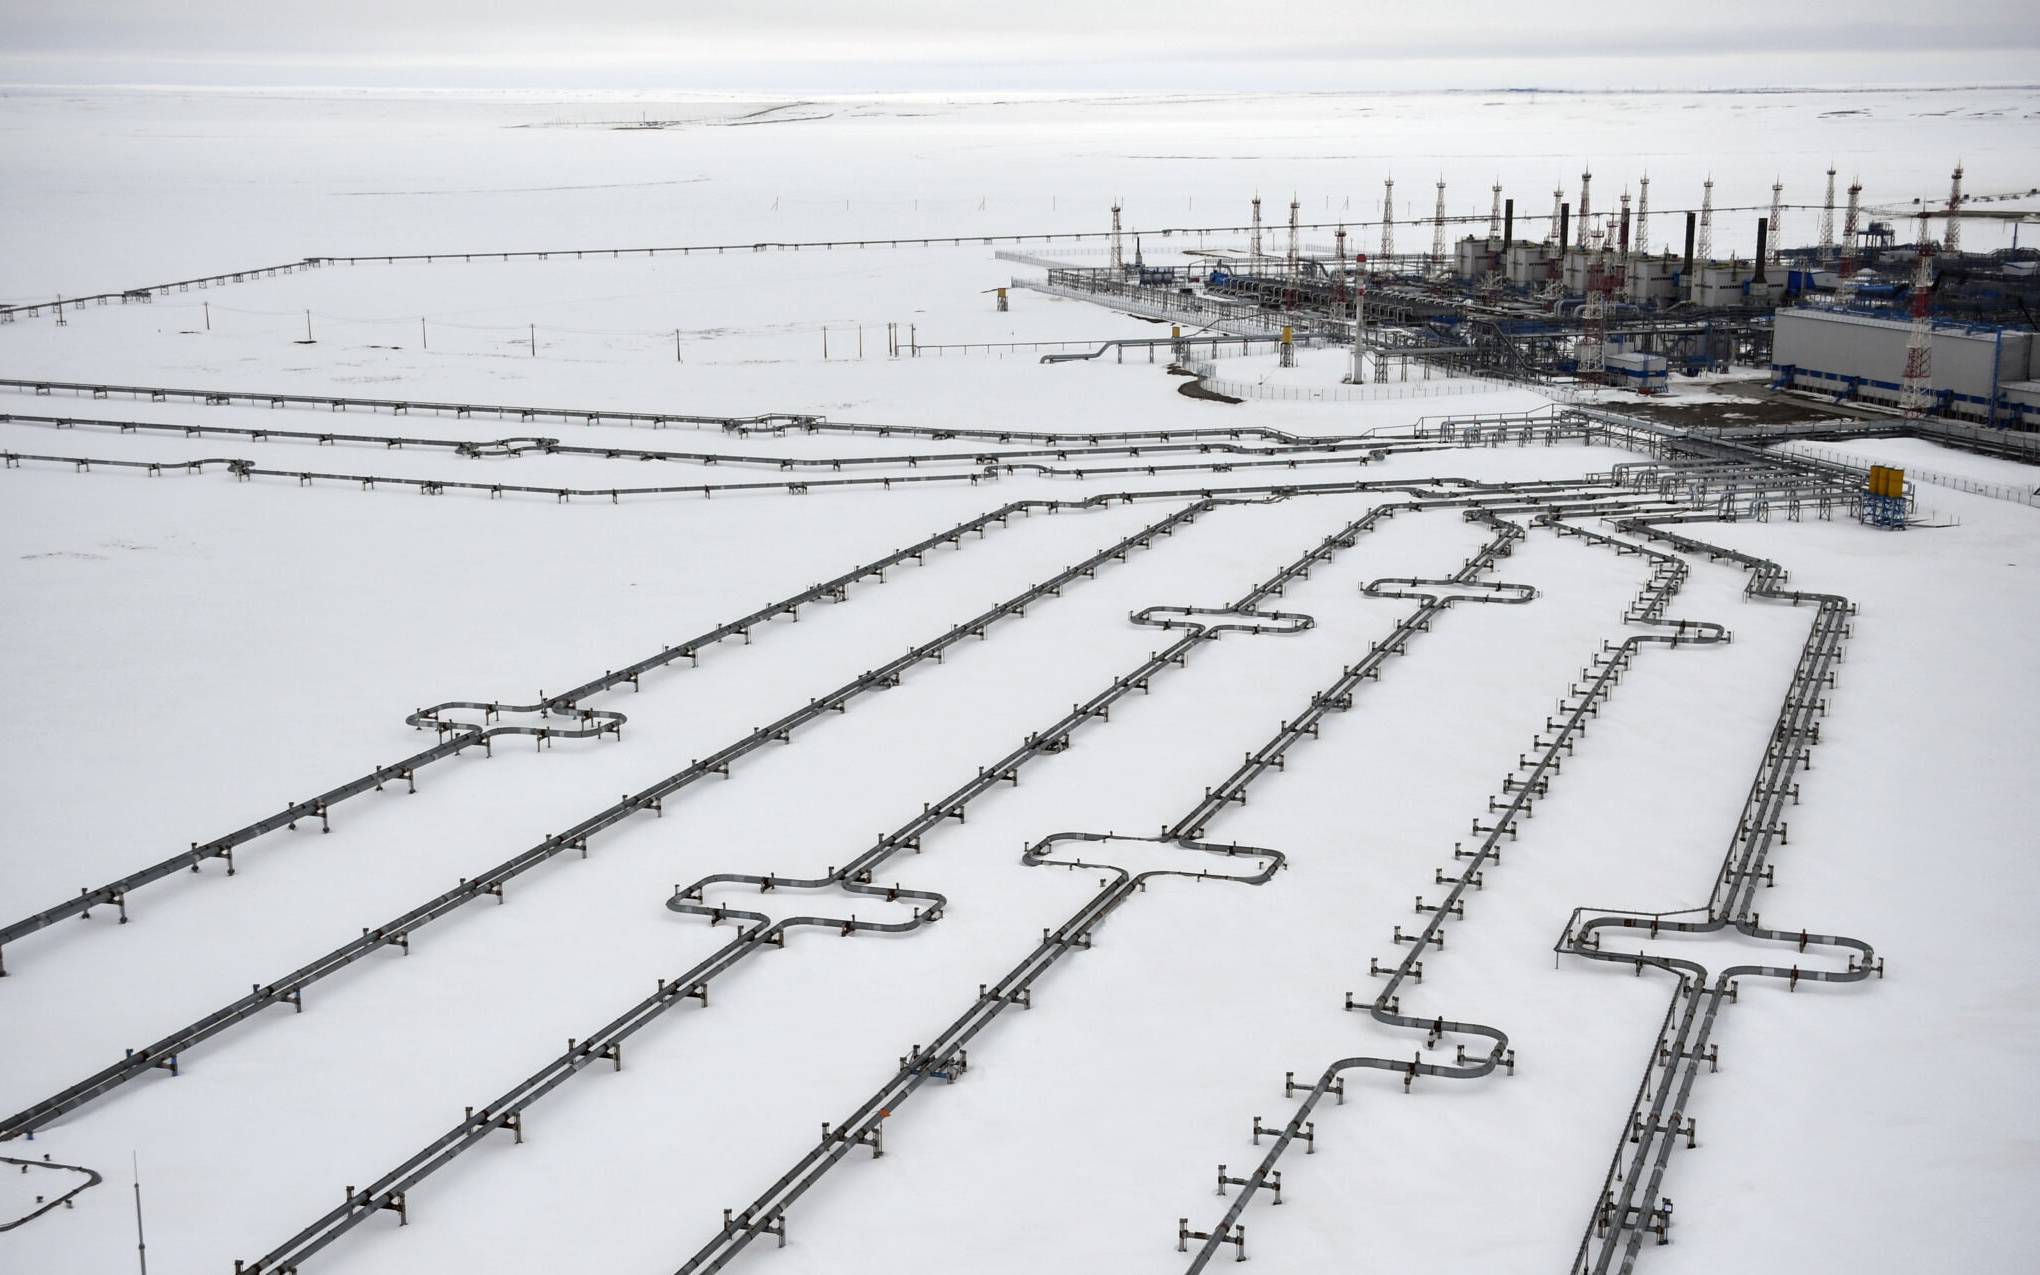 Incoming pipelines leading to the Bovanenkovo gas field on the Yamal peninsula in the Arctic circle on May 21, 2019. (Photo by Alexander NEMENOV / AFP)